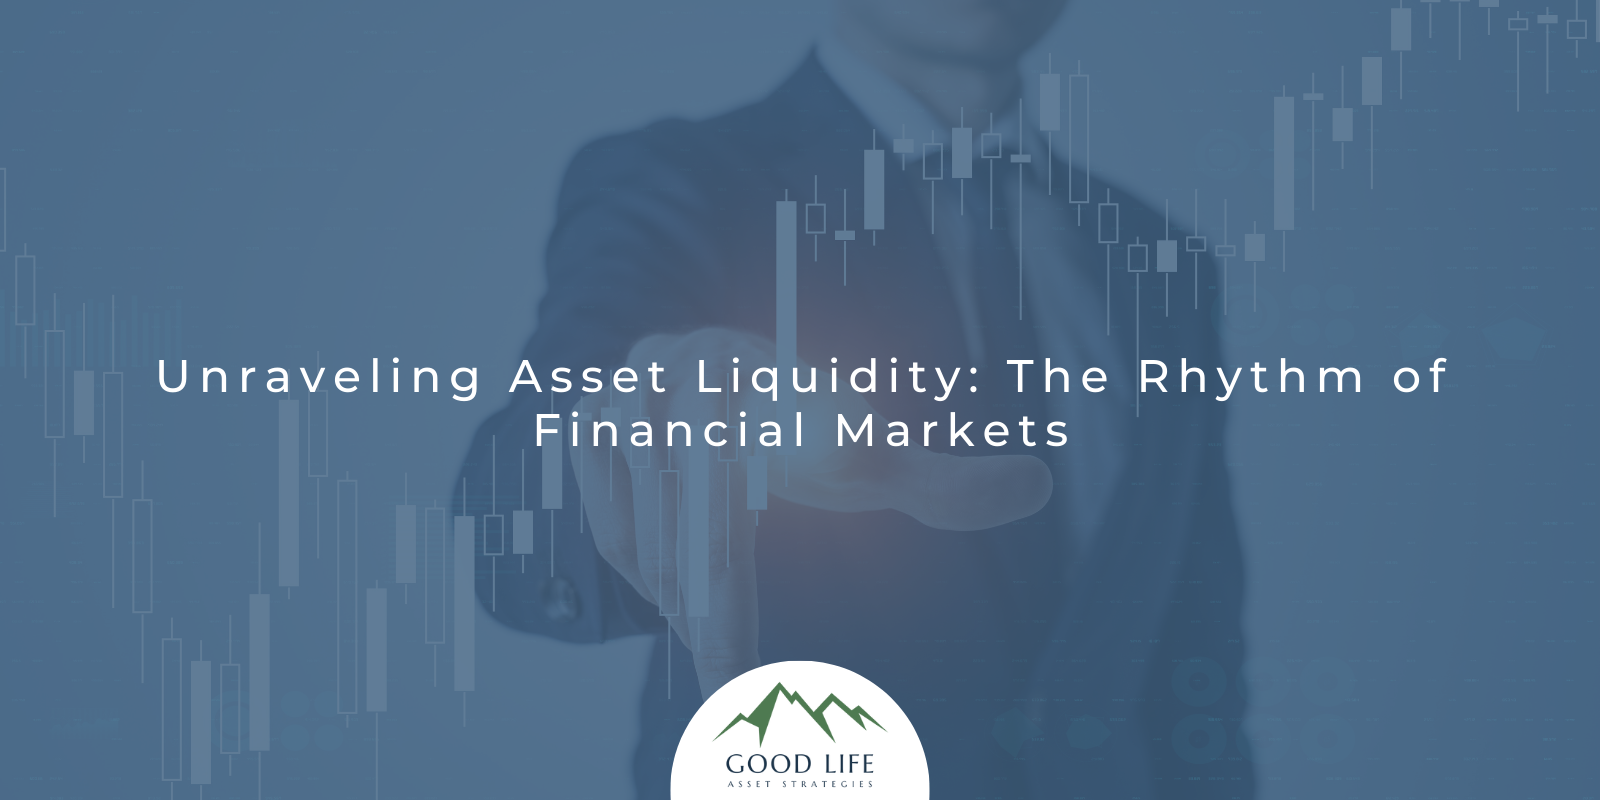 Unraveling Asset Liquidity: The Rhythm of Financial Markets